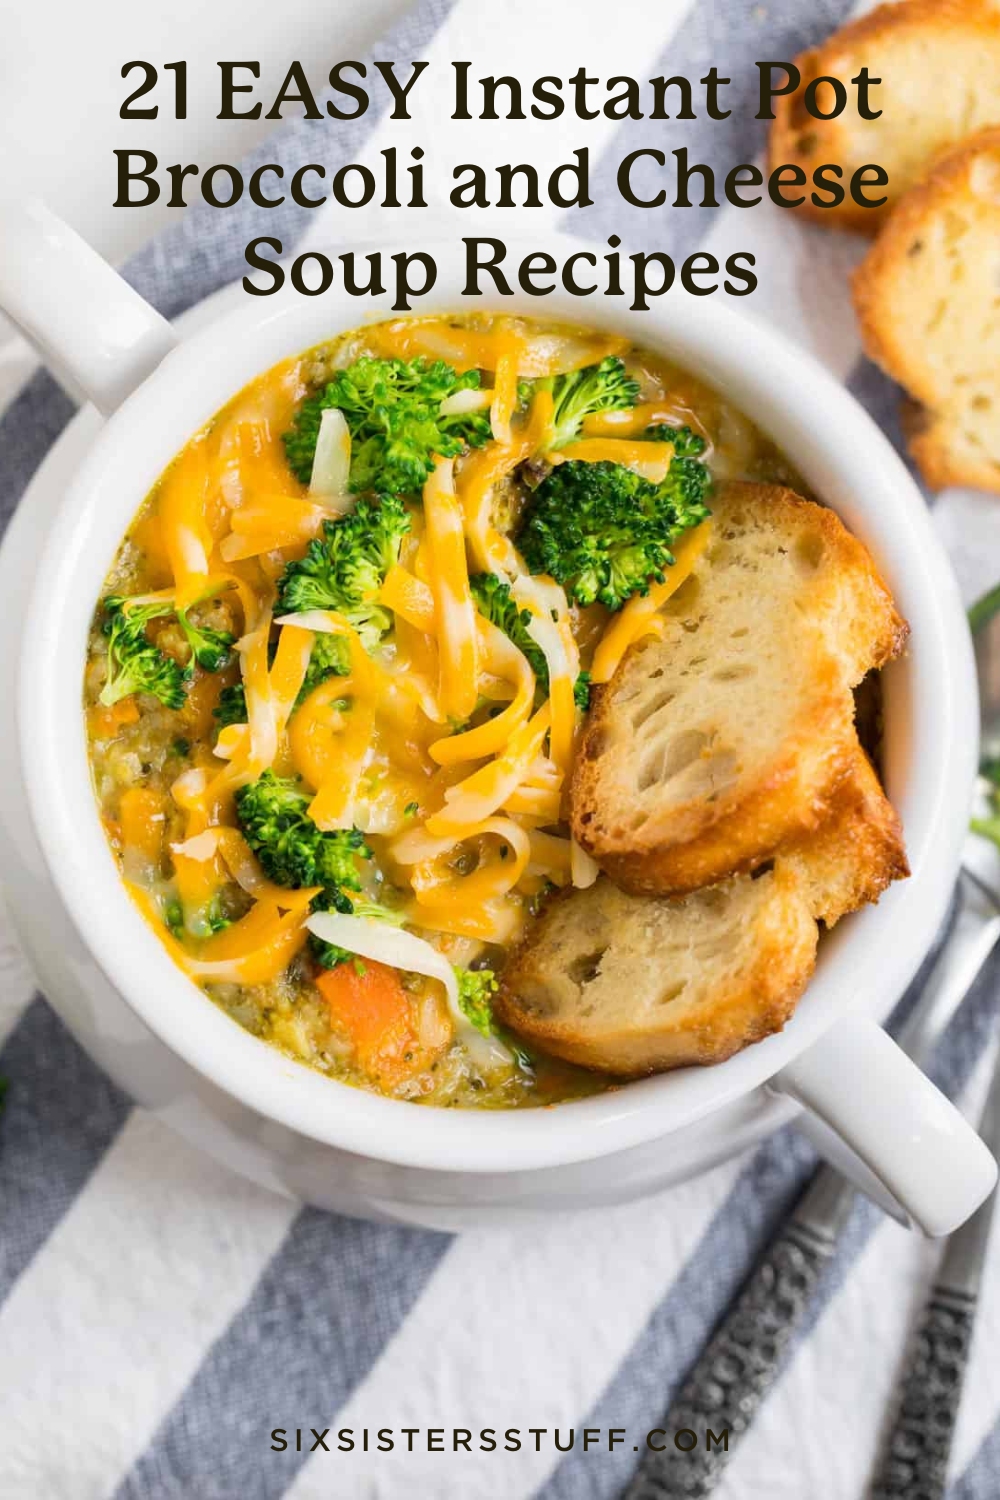 21 EASY Instant Pot Broccoli and Cheese Soup Recipes